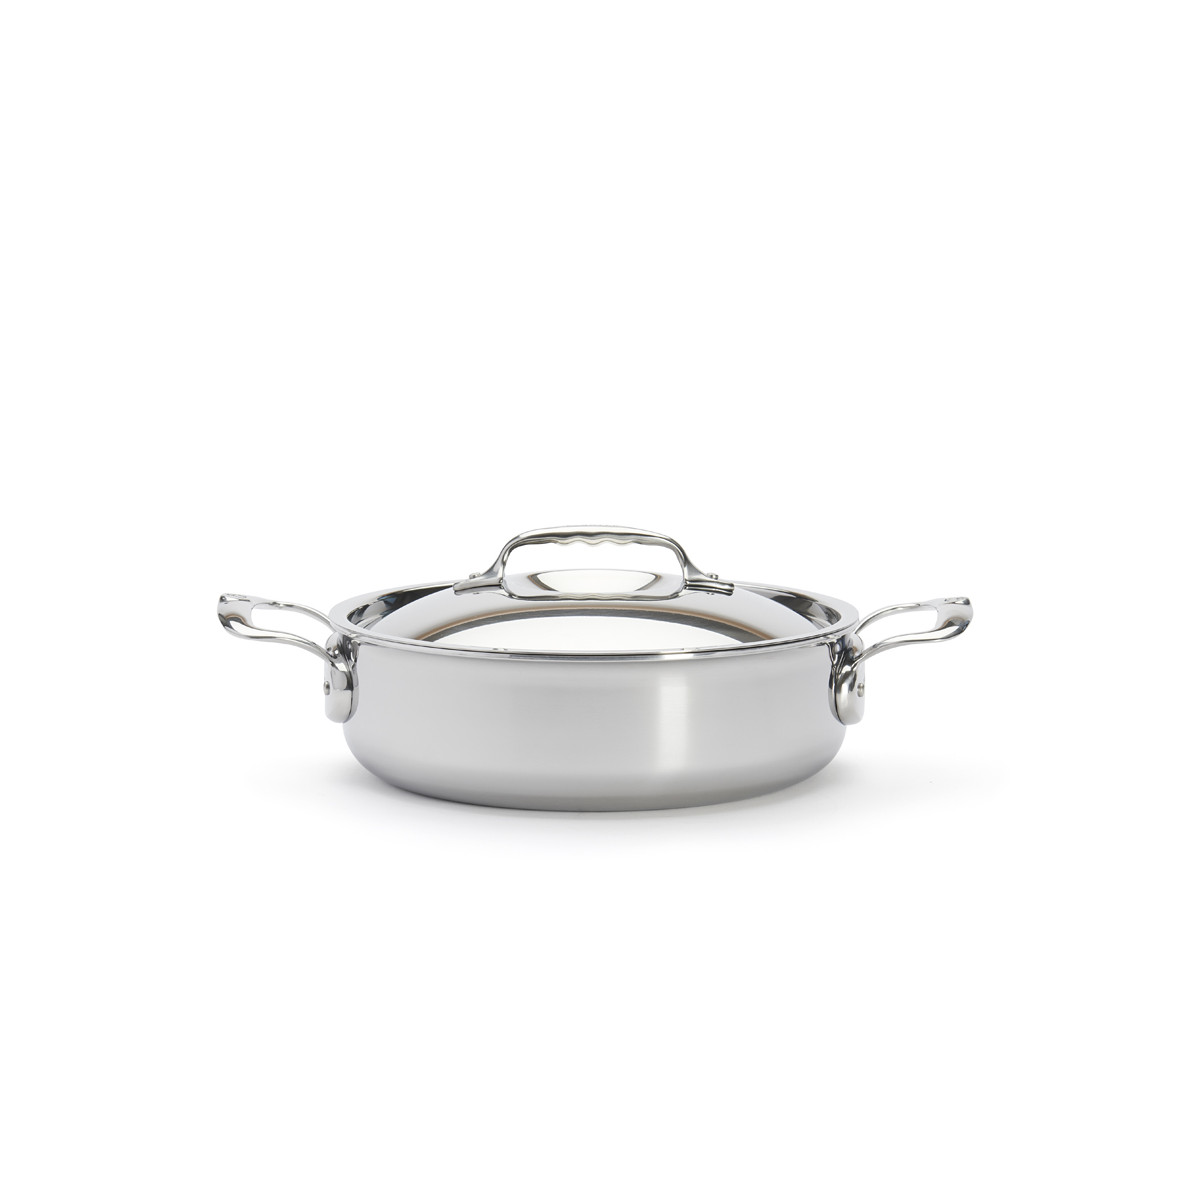 AFFINITY Stainless Steel Cookware